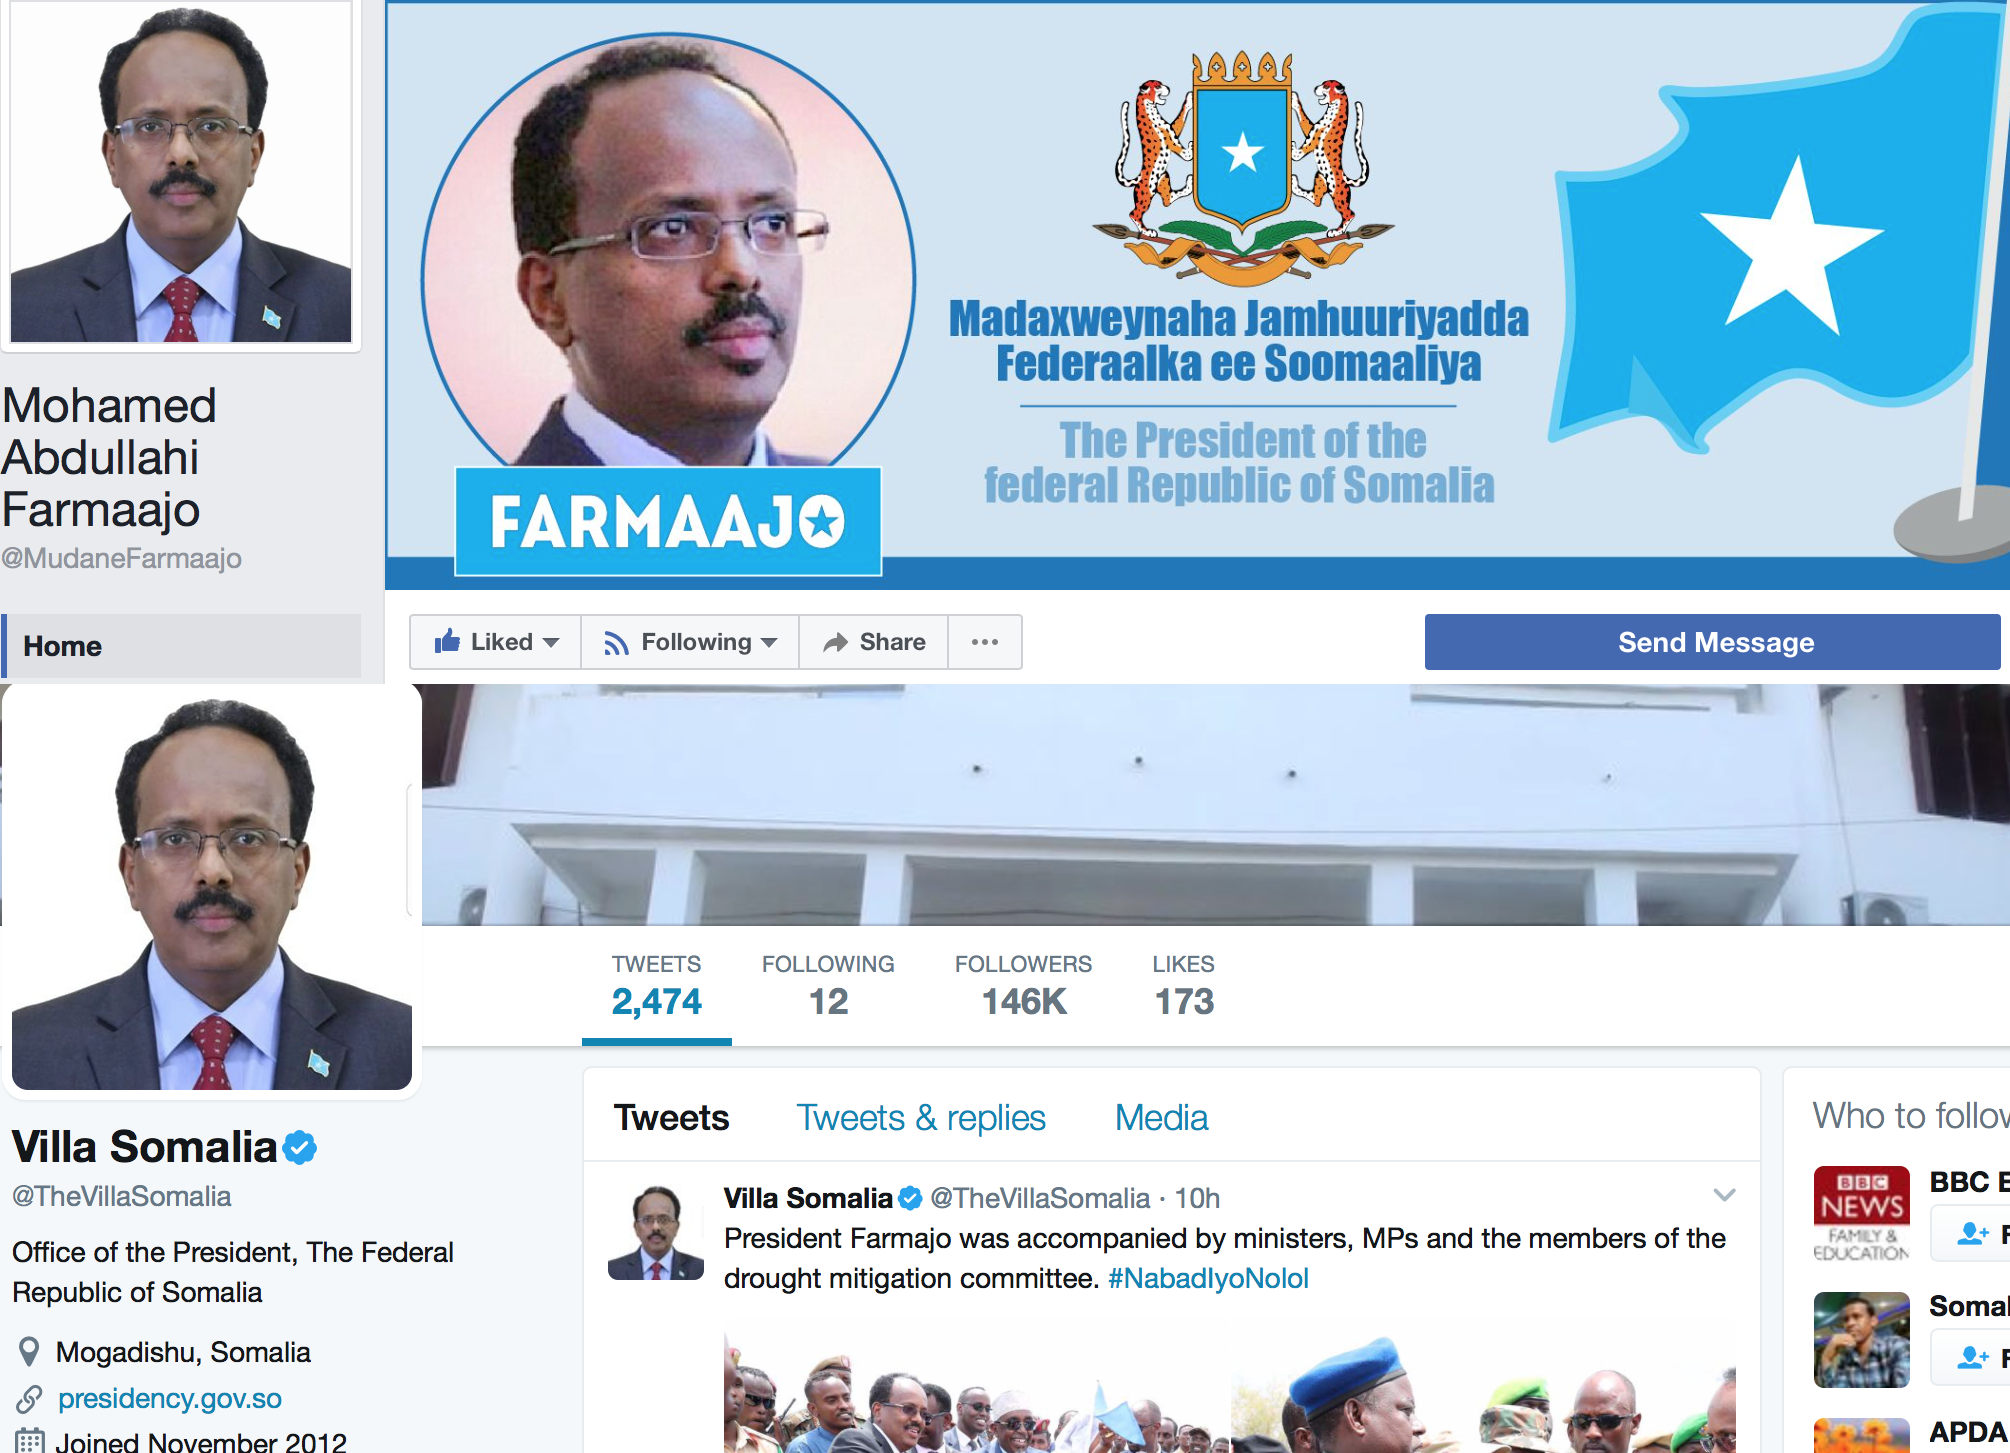 President of twitter and facebook not of Somalia.